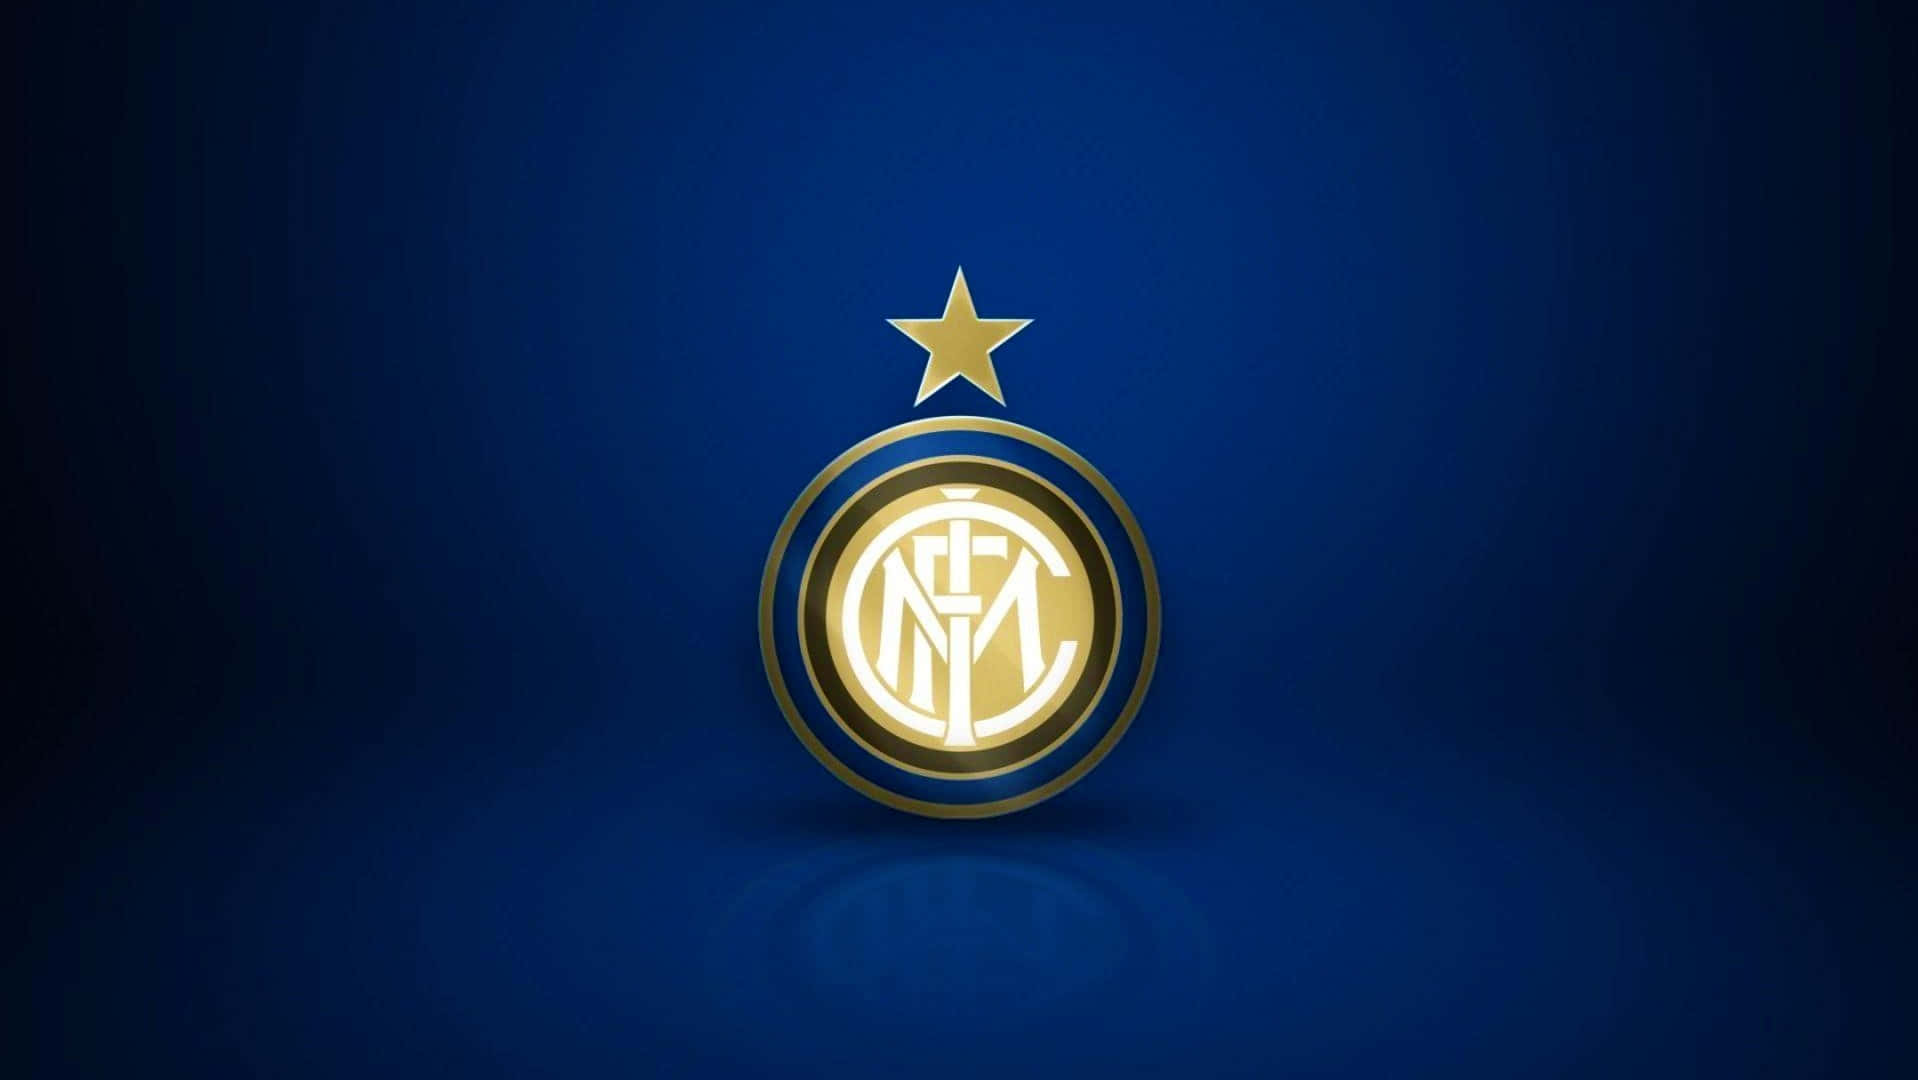 Inter Milan players celebrating on the field Wallpaper